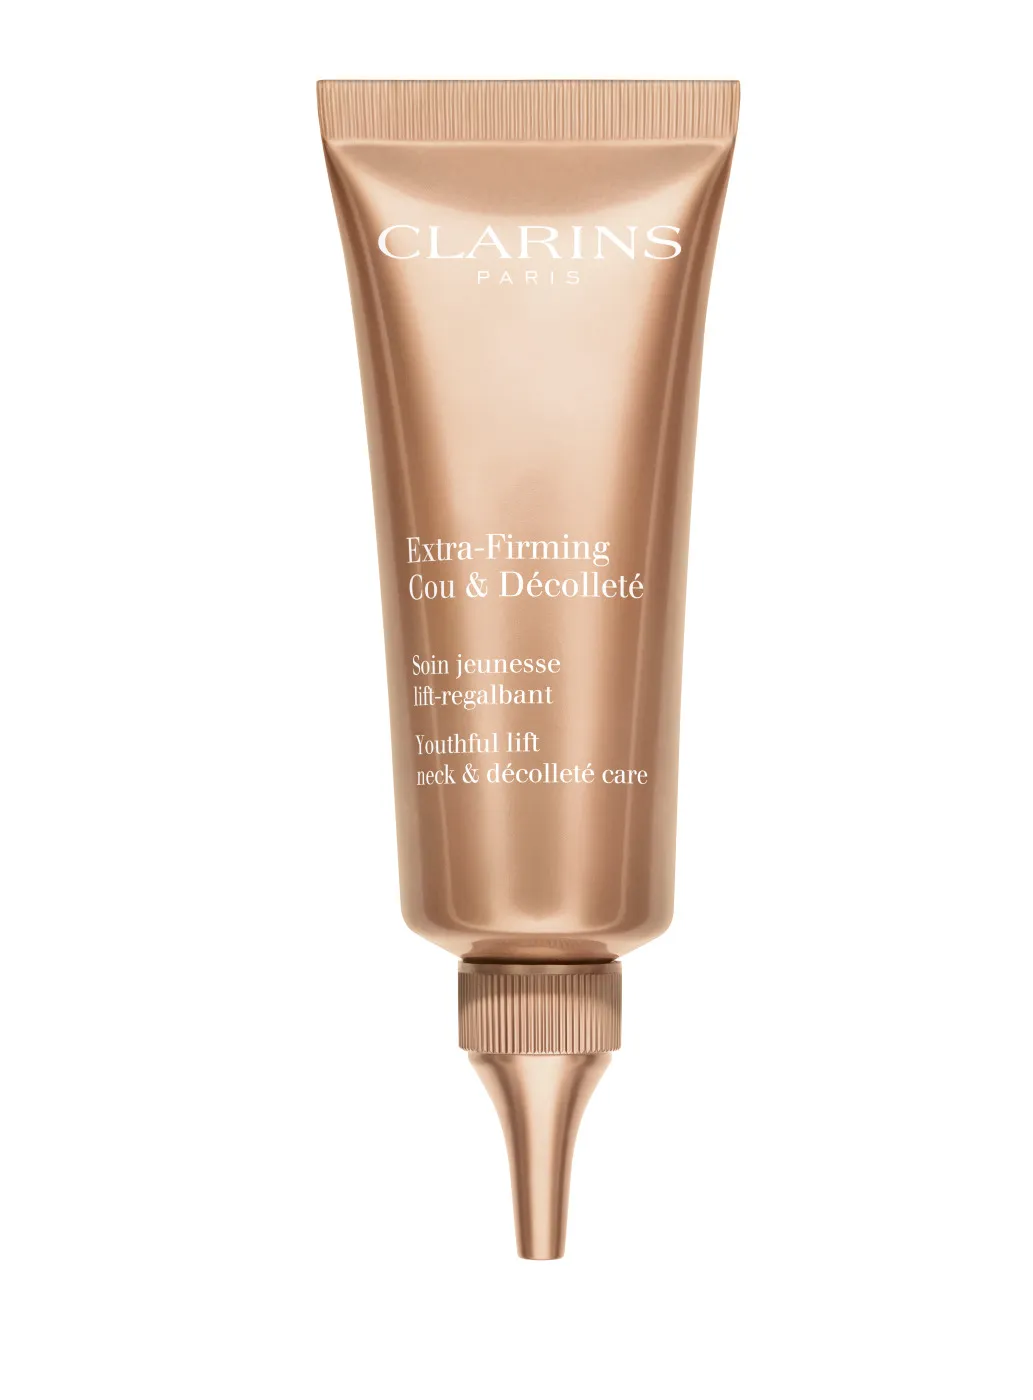 Clarins Extra Firming Youthful Lift Neck & Decollete Care